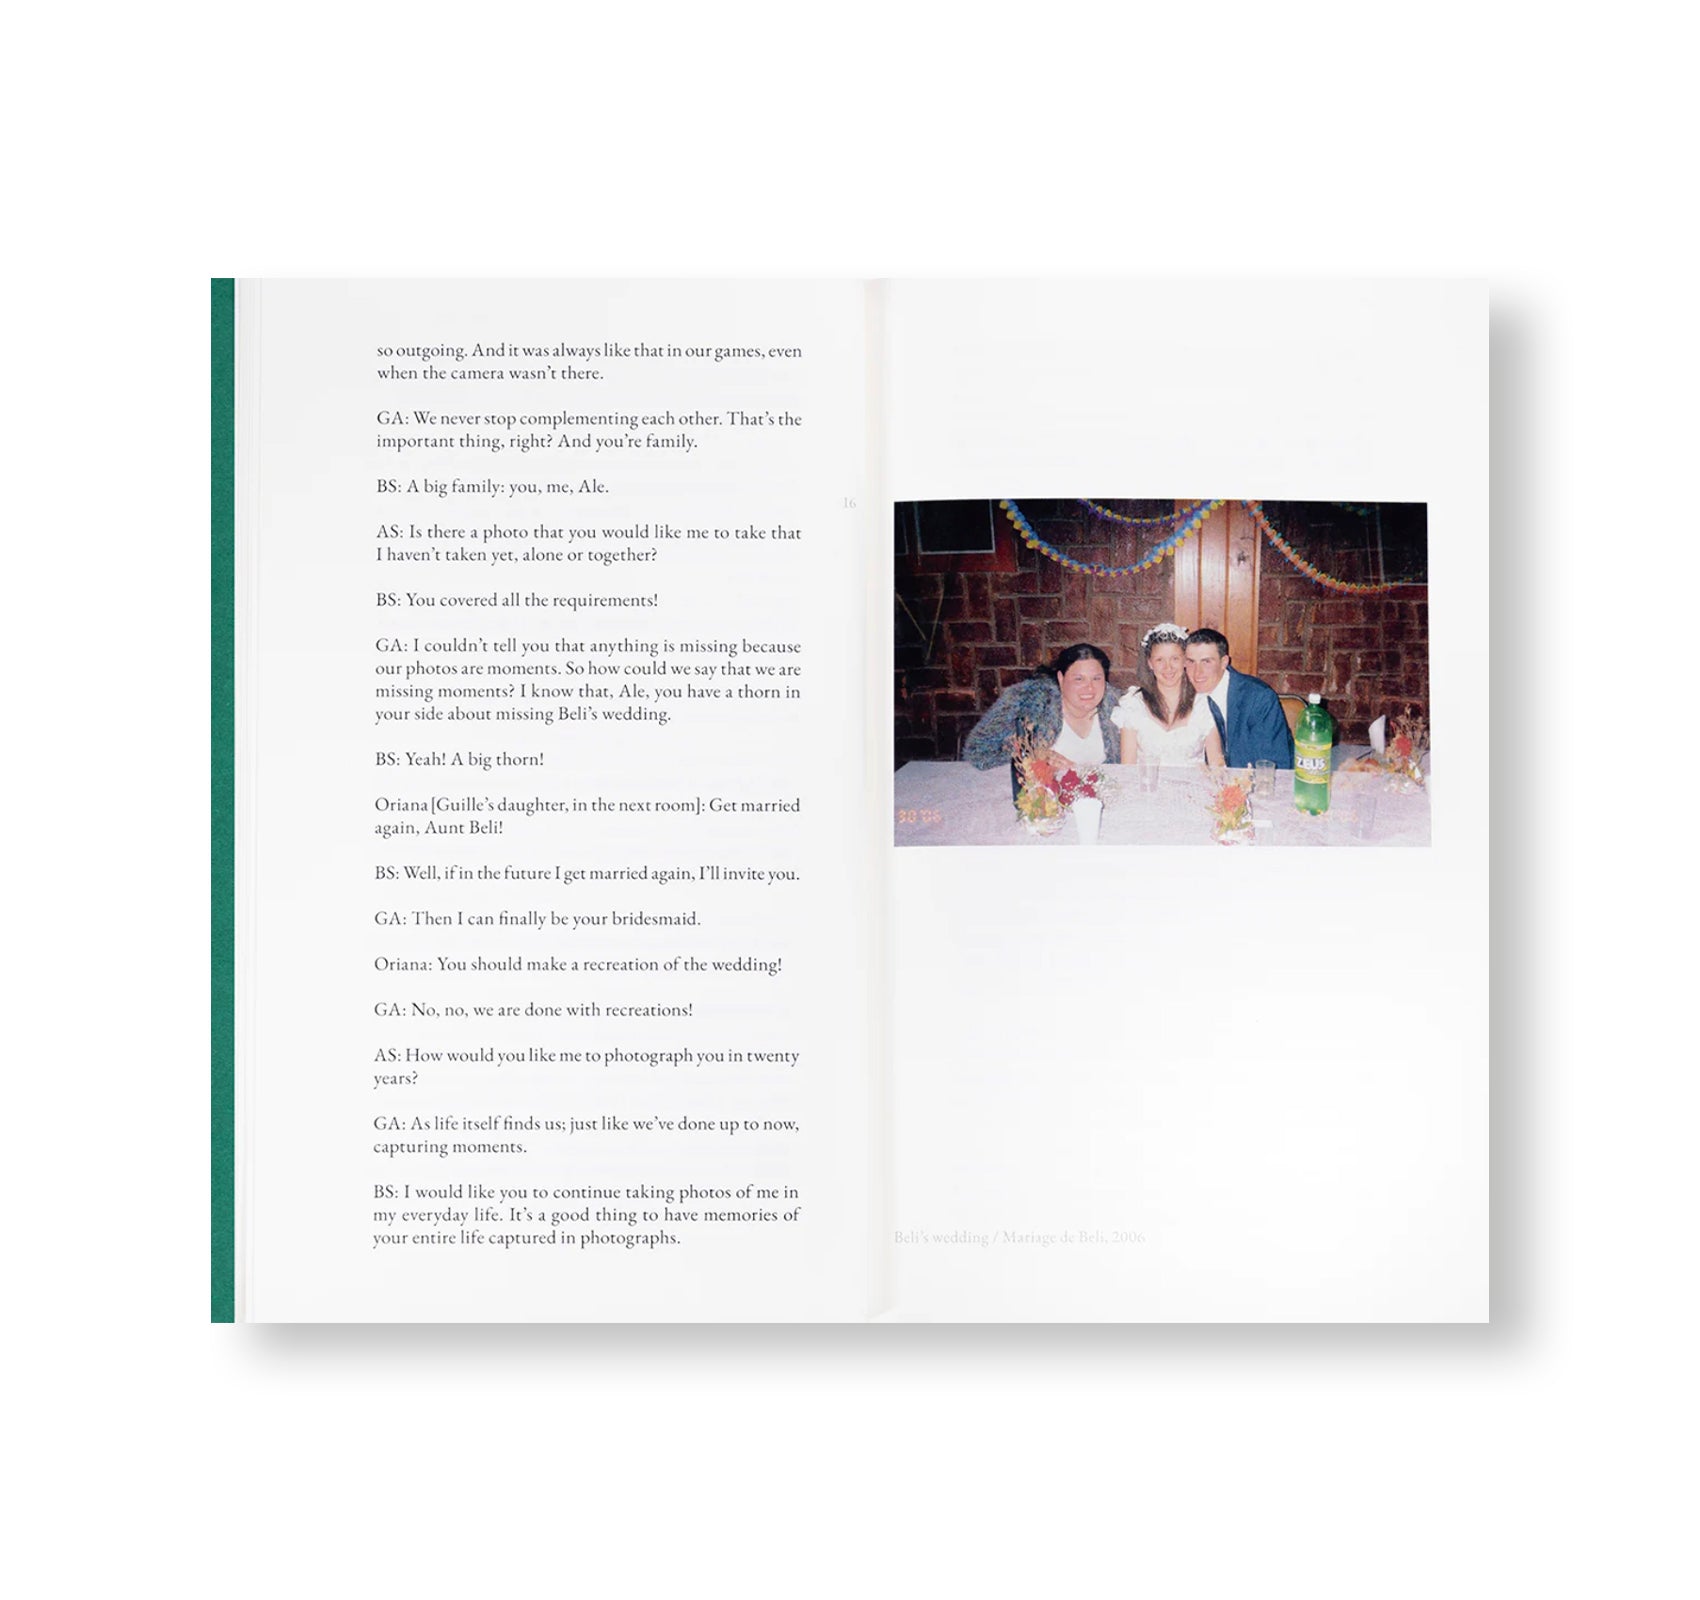 OVER TIME: CONVERSATIONS ABOUT DOCUMENTS AND DREAMS by Alessandra Sanguinetti